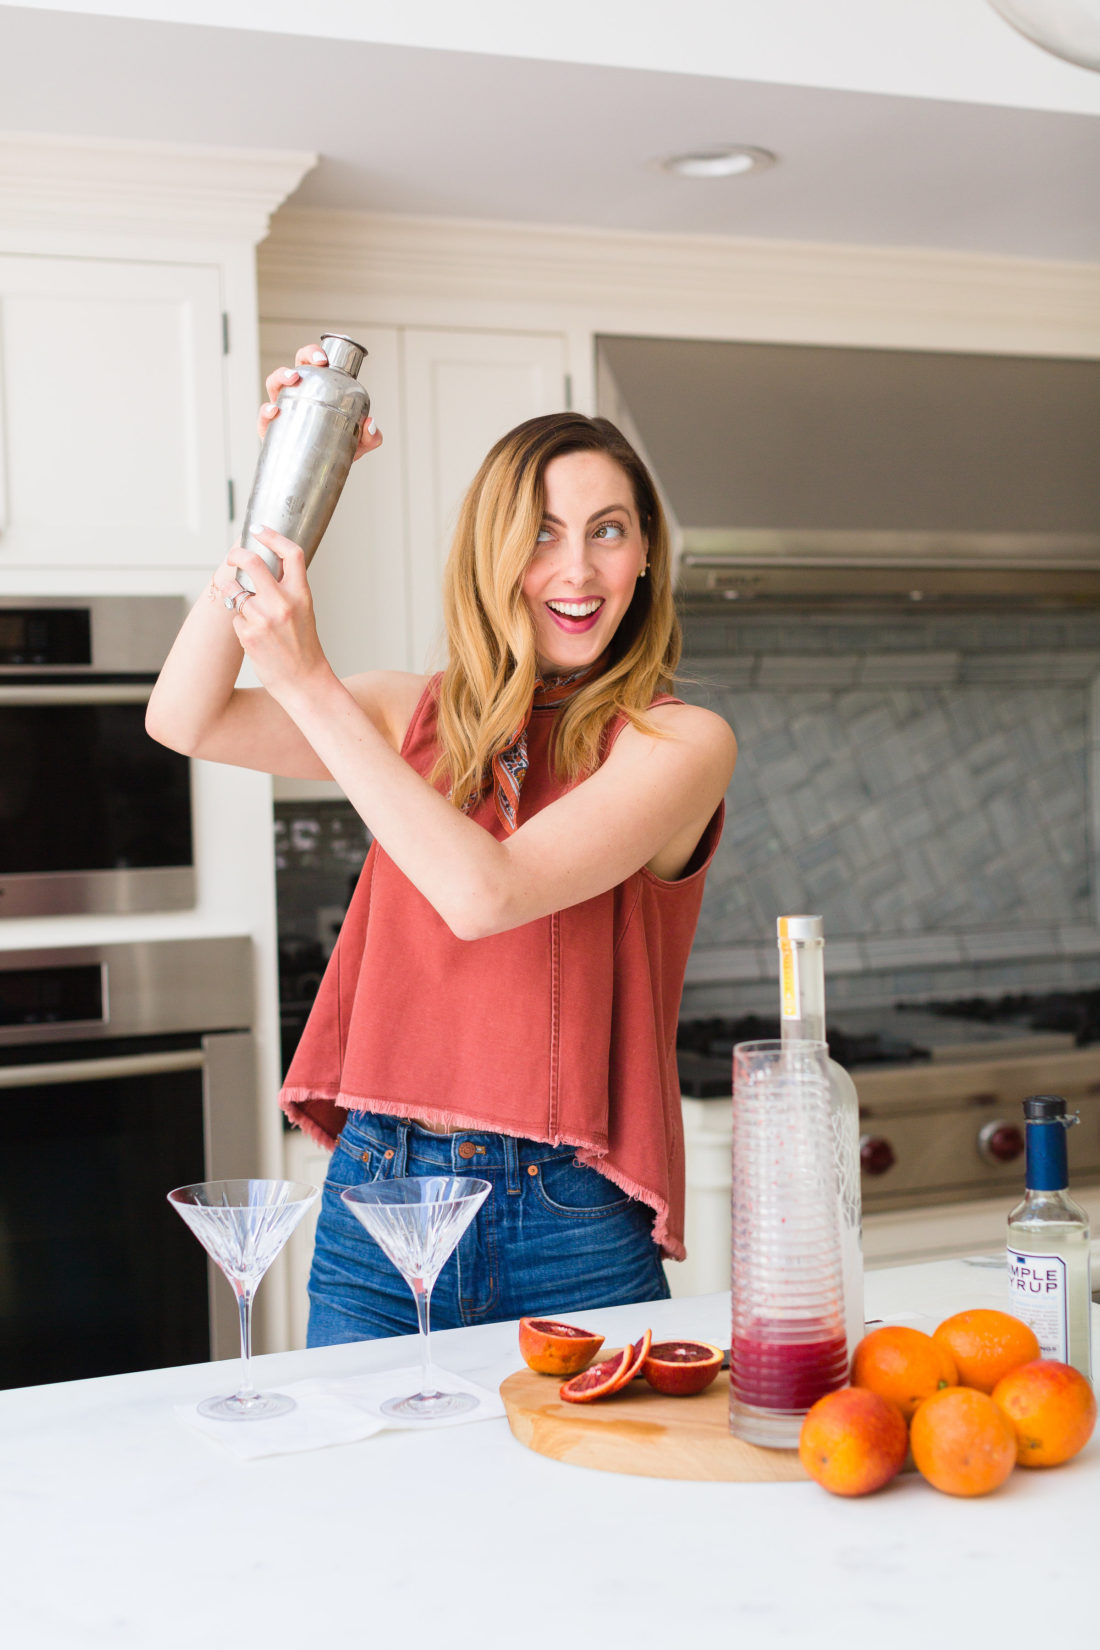 Eva Amurri Martino shakes up her blood orange and ginger martinis in a stainless steel cocktail shaker in the kitchen of her Connecticut home